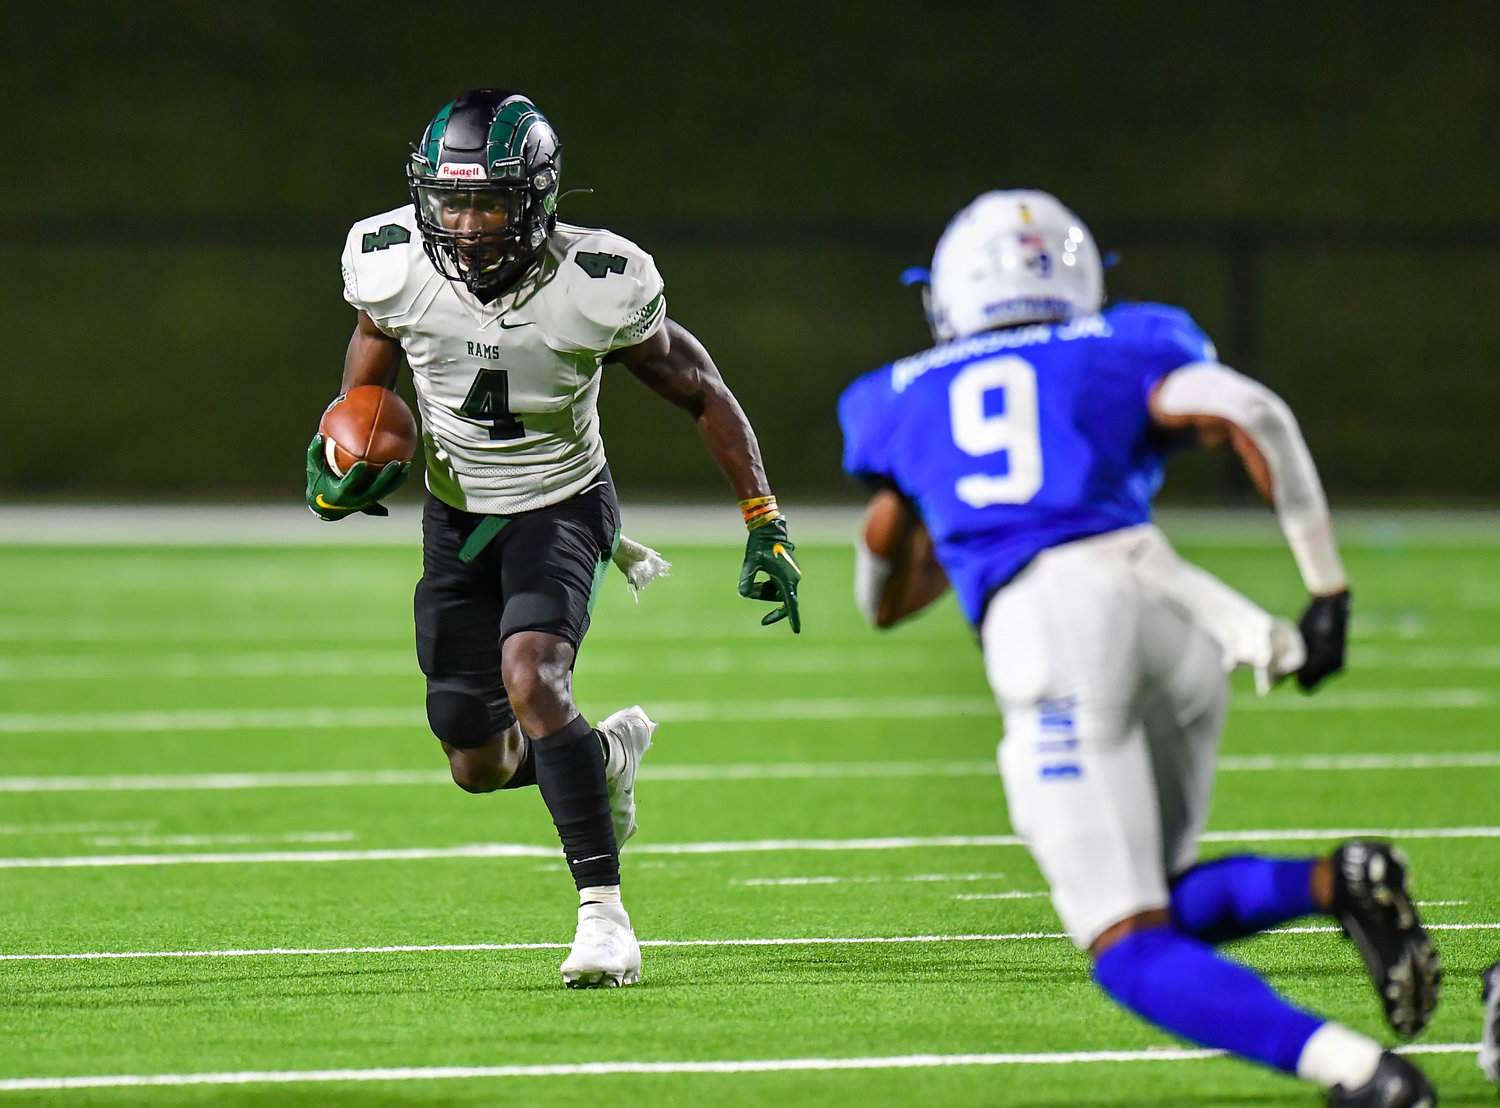 Katy, Tx. Oct 15, 2021: Mayde Creeks Tay'Shawn Wilson #4 carries the ball during a conference game between Mayde Creek and Katy Taylor at Rhodes Stadium. (Photo by Mark Goodman / Katy Times)